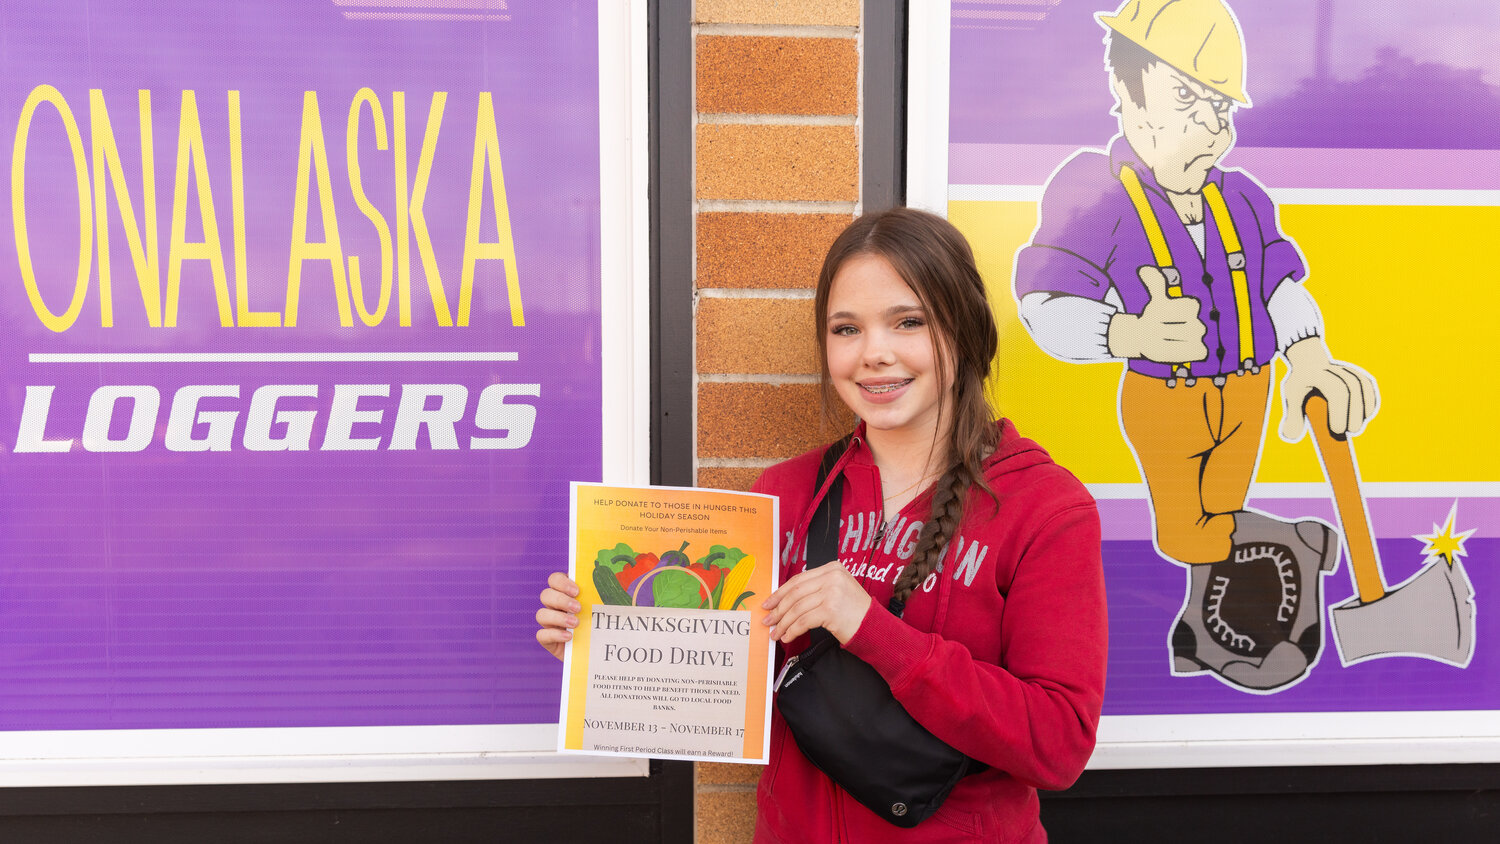 Kate Zandell smiles for a photo on Tuesday, Nov. 28, while holding up a Thanksgiving Food Drive flier she designed at Onalaska High School to help raise awareness around hunger during the holiday season.